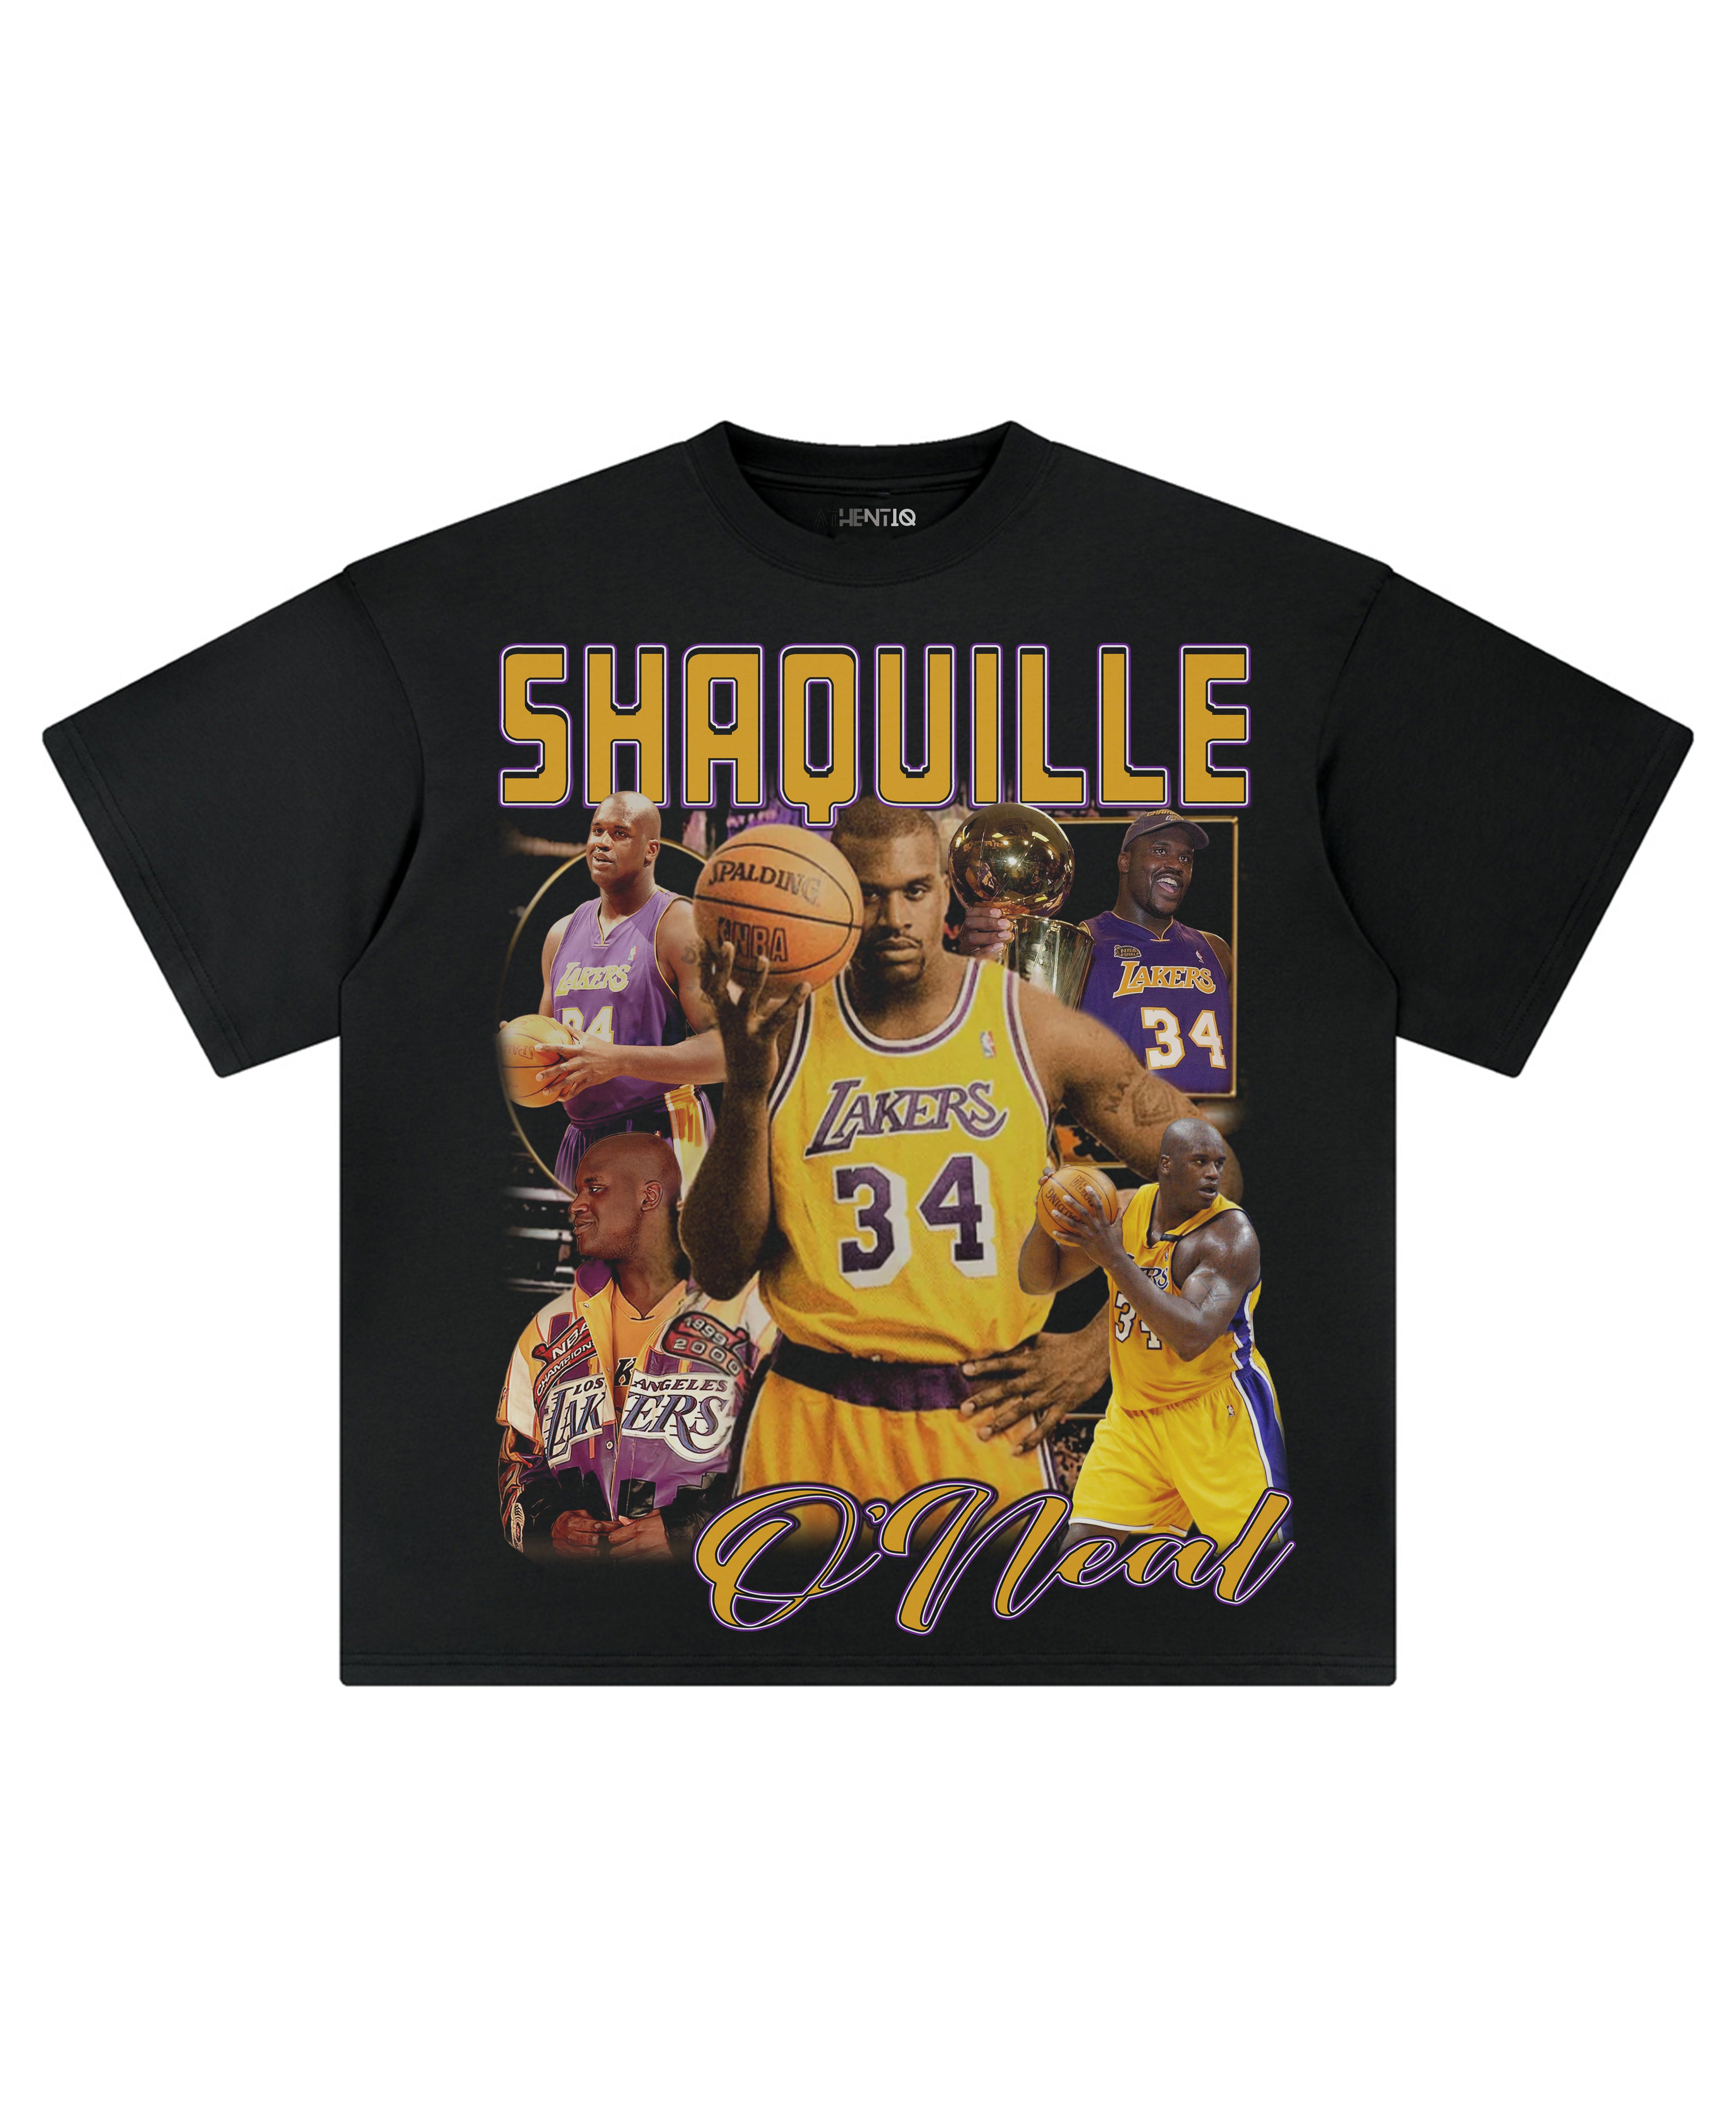 SHAQUILLE O'NEAL TEE